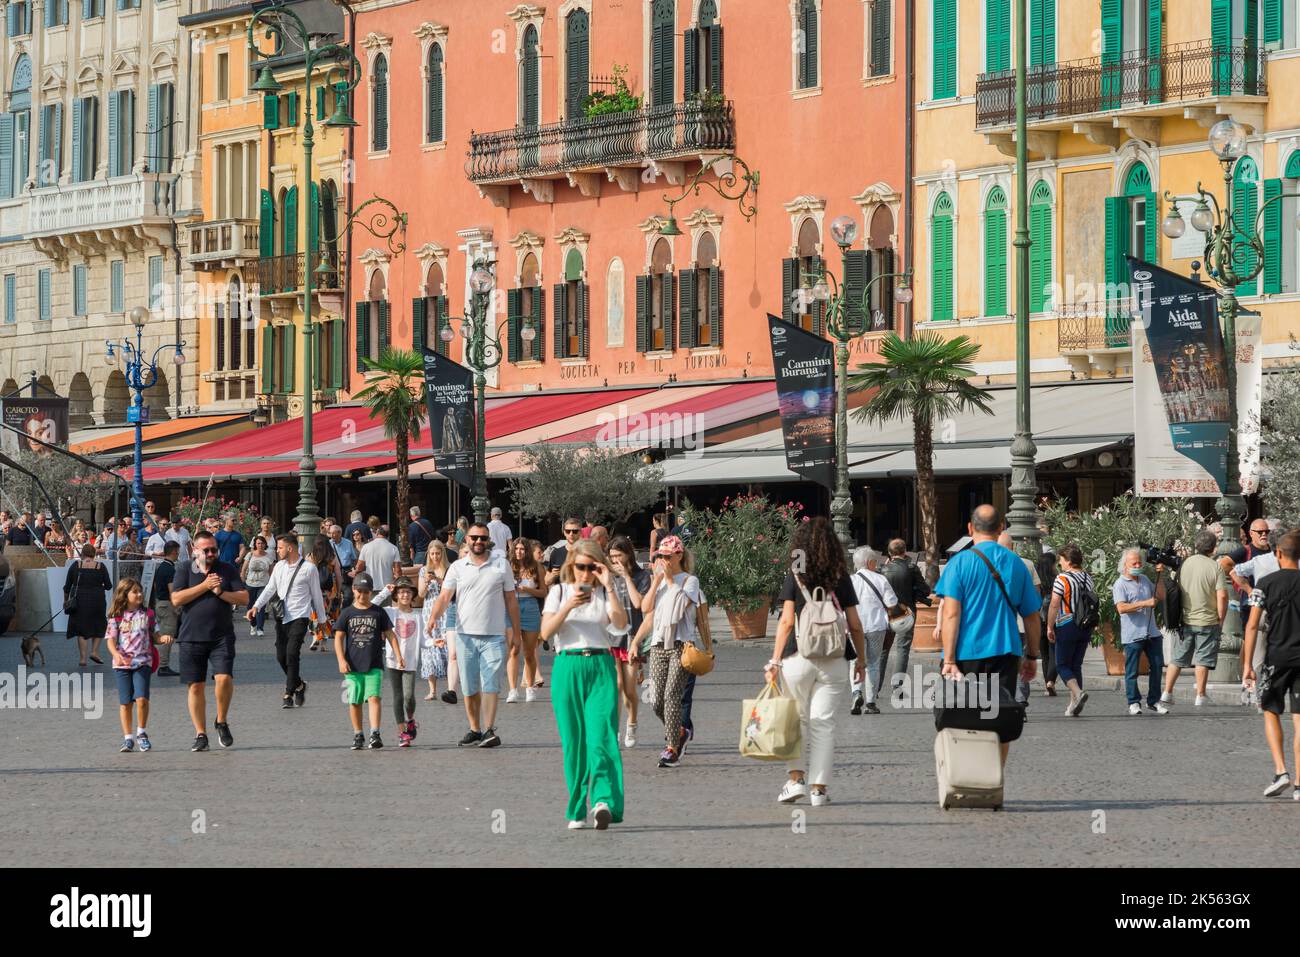 Piazza Verona, view in summer of people walking through Piazza Bra in the historic center of the city of Verona, Veneto, Italy Stock Photo